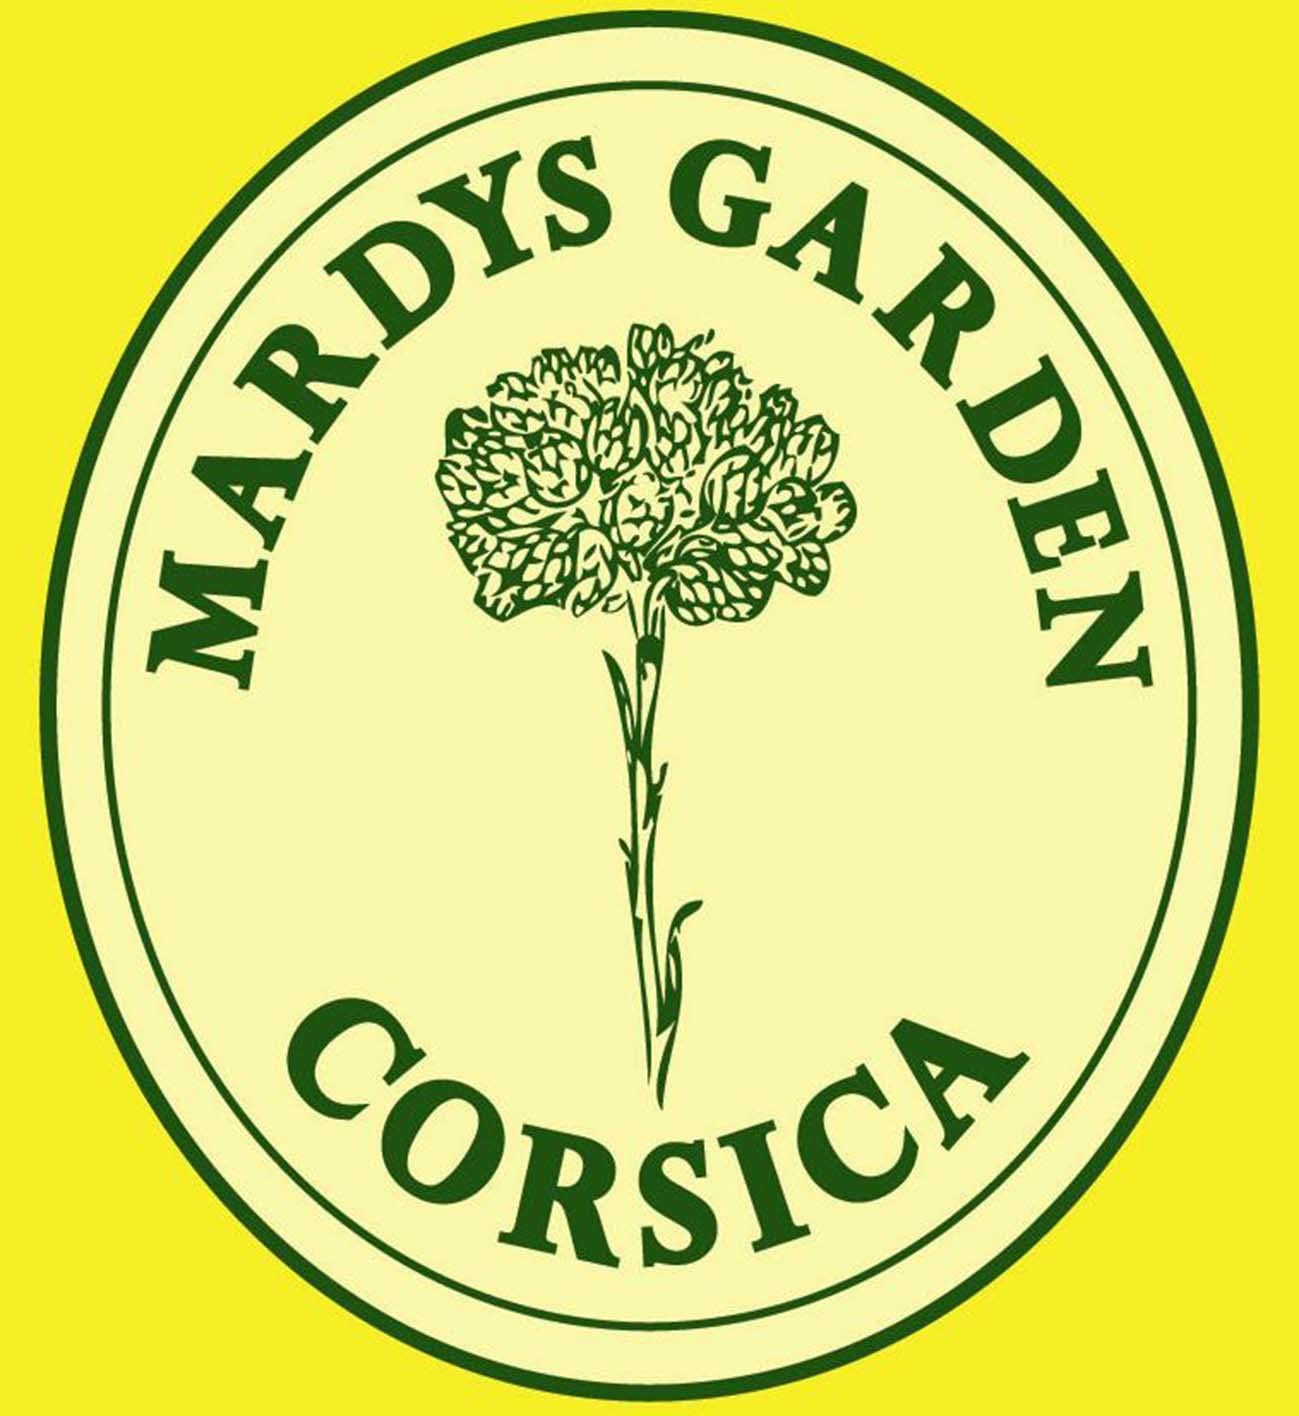 MARDYS GARDEN logo. Certified organic farmer since 2008 bu Bureau Veritas. We live ecologically on-site on our farm in Calvi. We produce Immortelle, Myrtle, Rosemary, Lavender where it grows naturally in Corsica. All our fields are near the sea and under great sun exposure. The best environement for Corsican Immortelle 